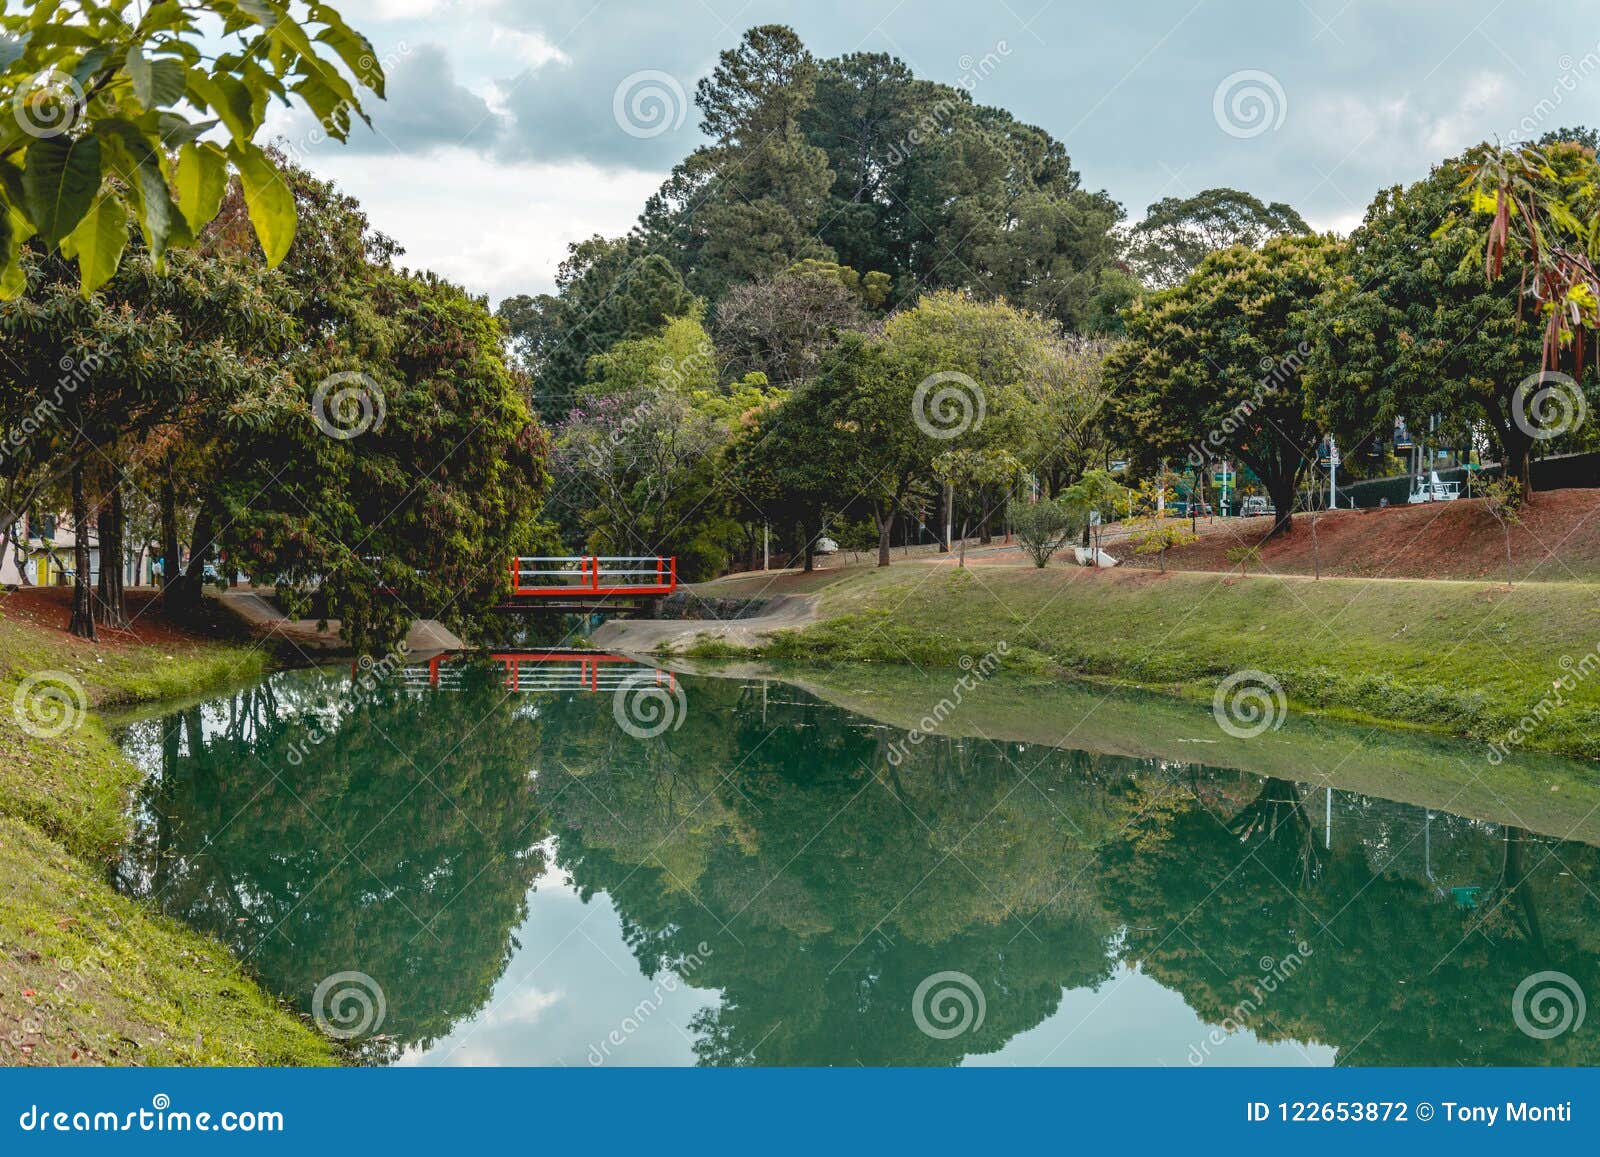 panoramic view of the ecological park, in indaiatuba, brazil.